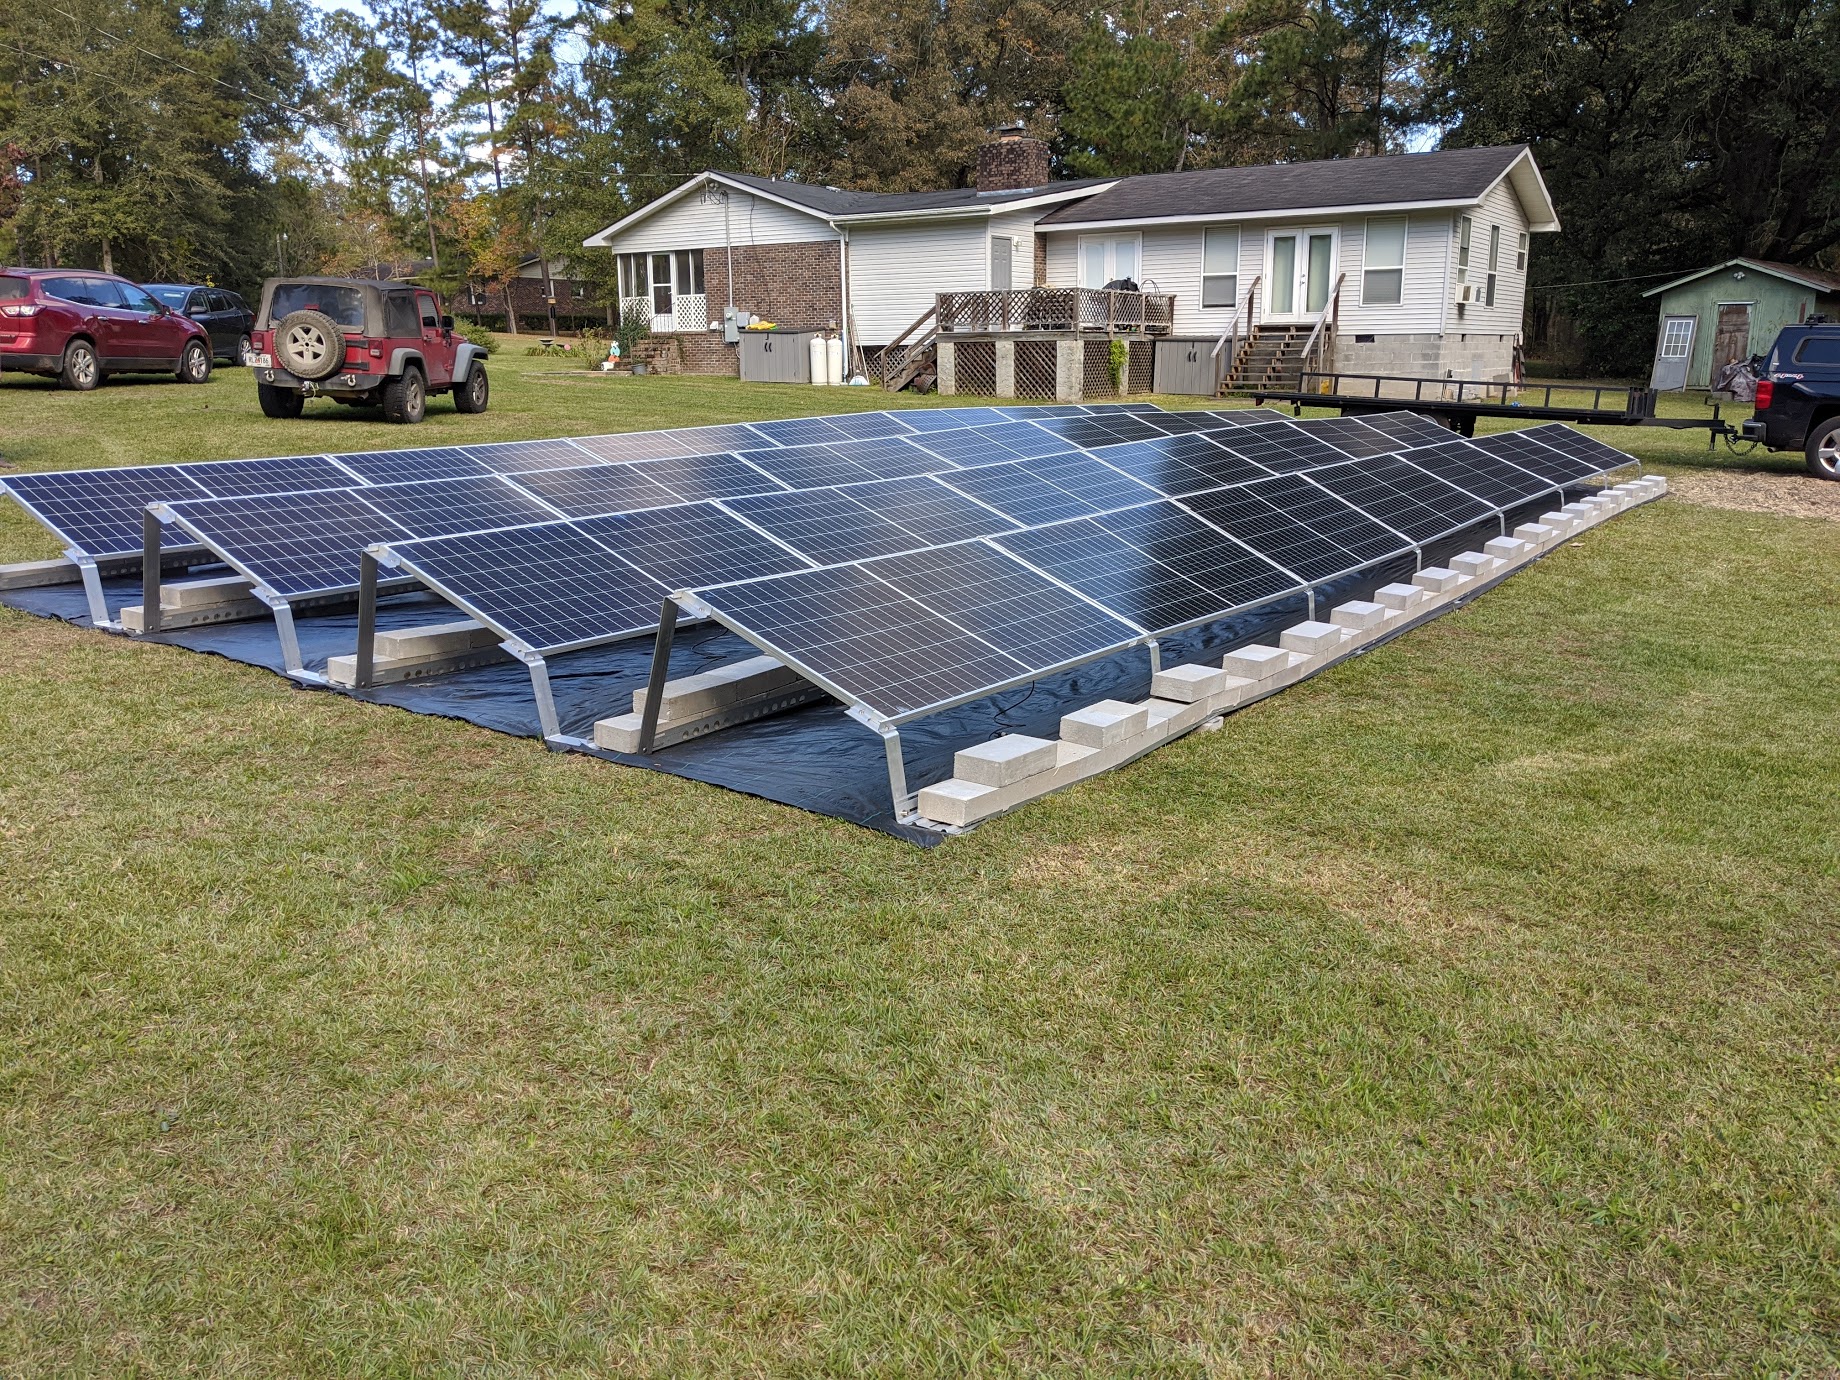 Image 2 - To keep the panels low to the ground, we used a ballasted racking system on this grid tie with battery backup system in Thomasville, Georgia.